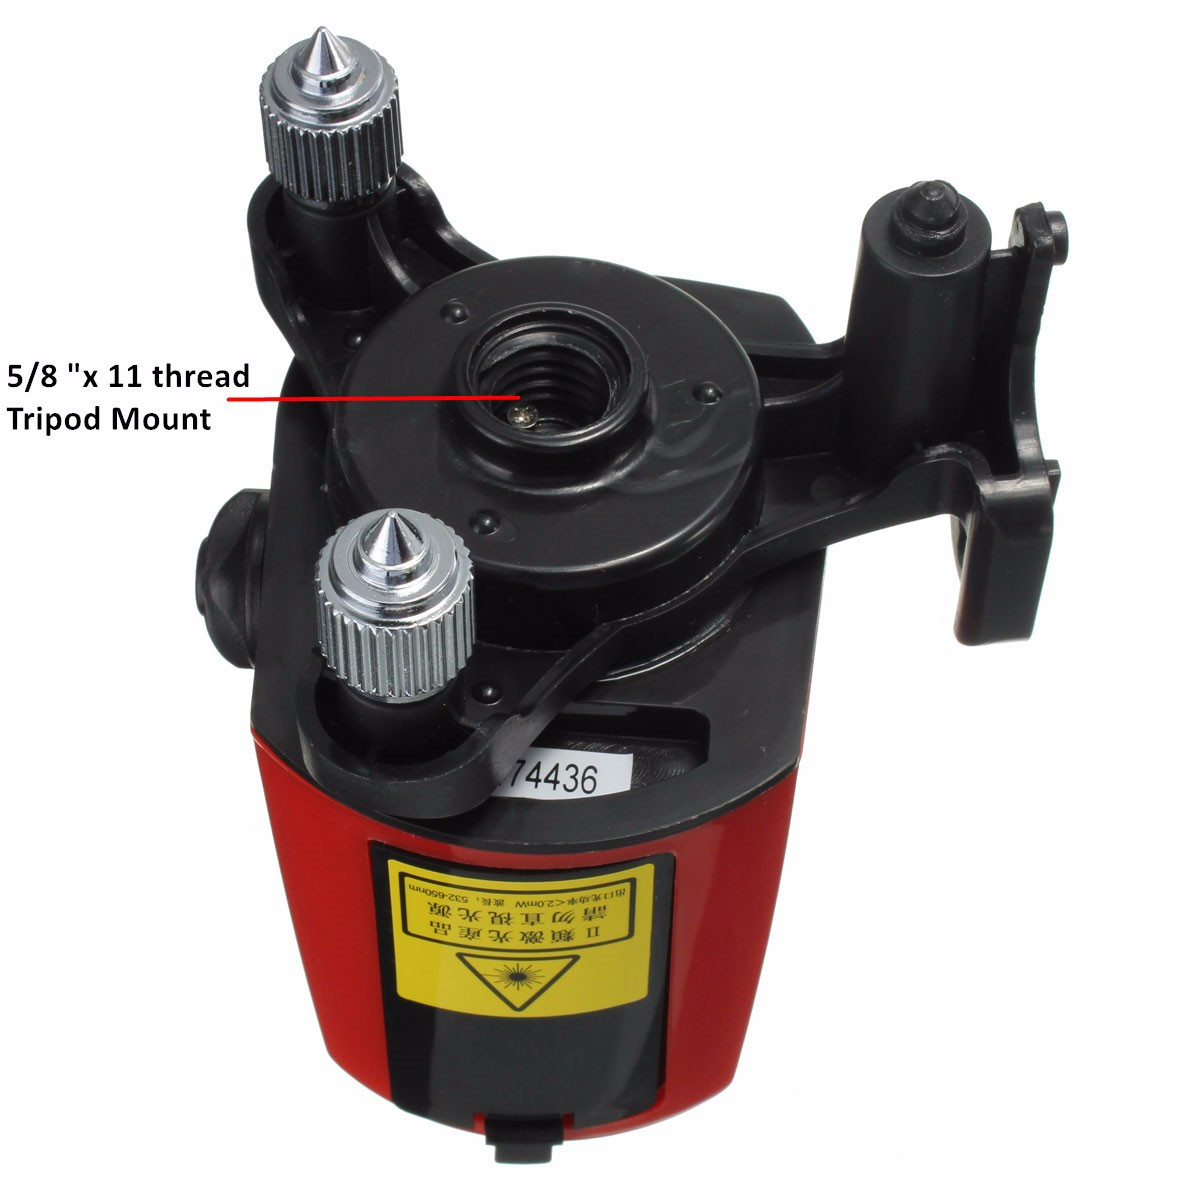 ACULINE-AK435-360degree-Self-Leveling-Cross-Laser-Level-Red-2-Line-1-Point-1205076